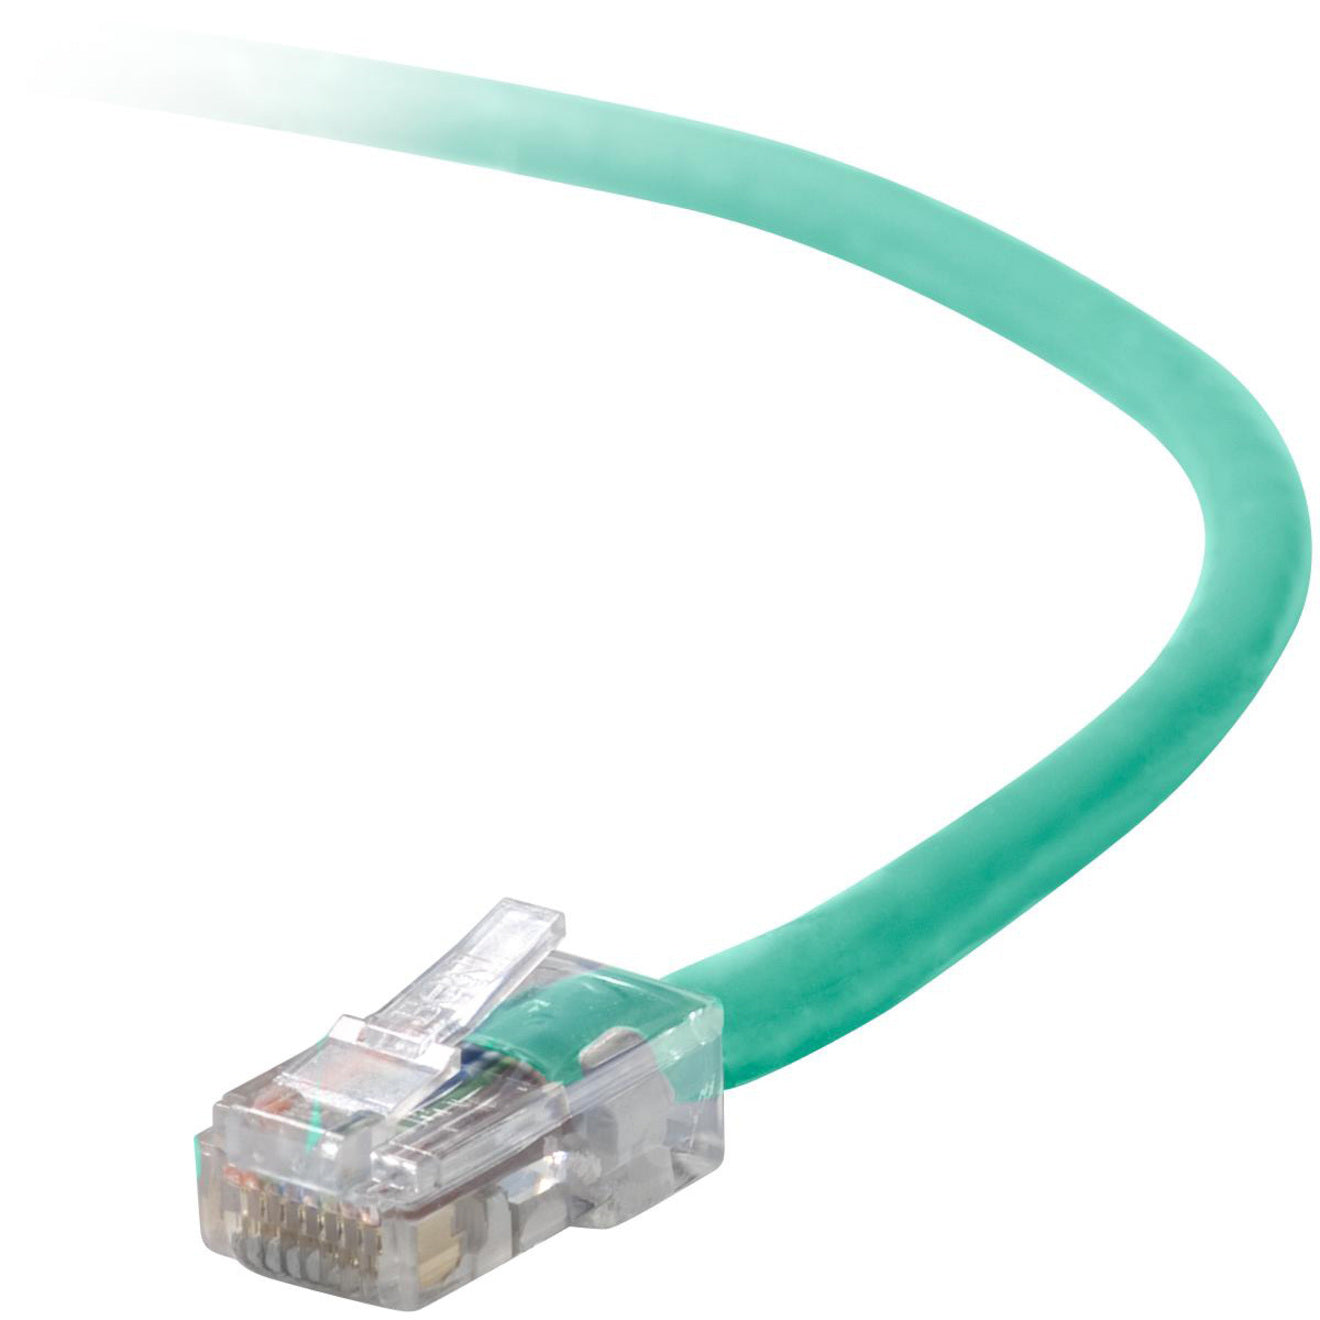 Belkin A3L791-12-GRN RJ45 Category 5e Patch Cable, 12 ft, Green